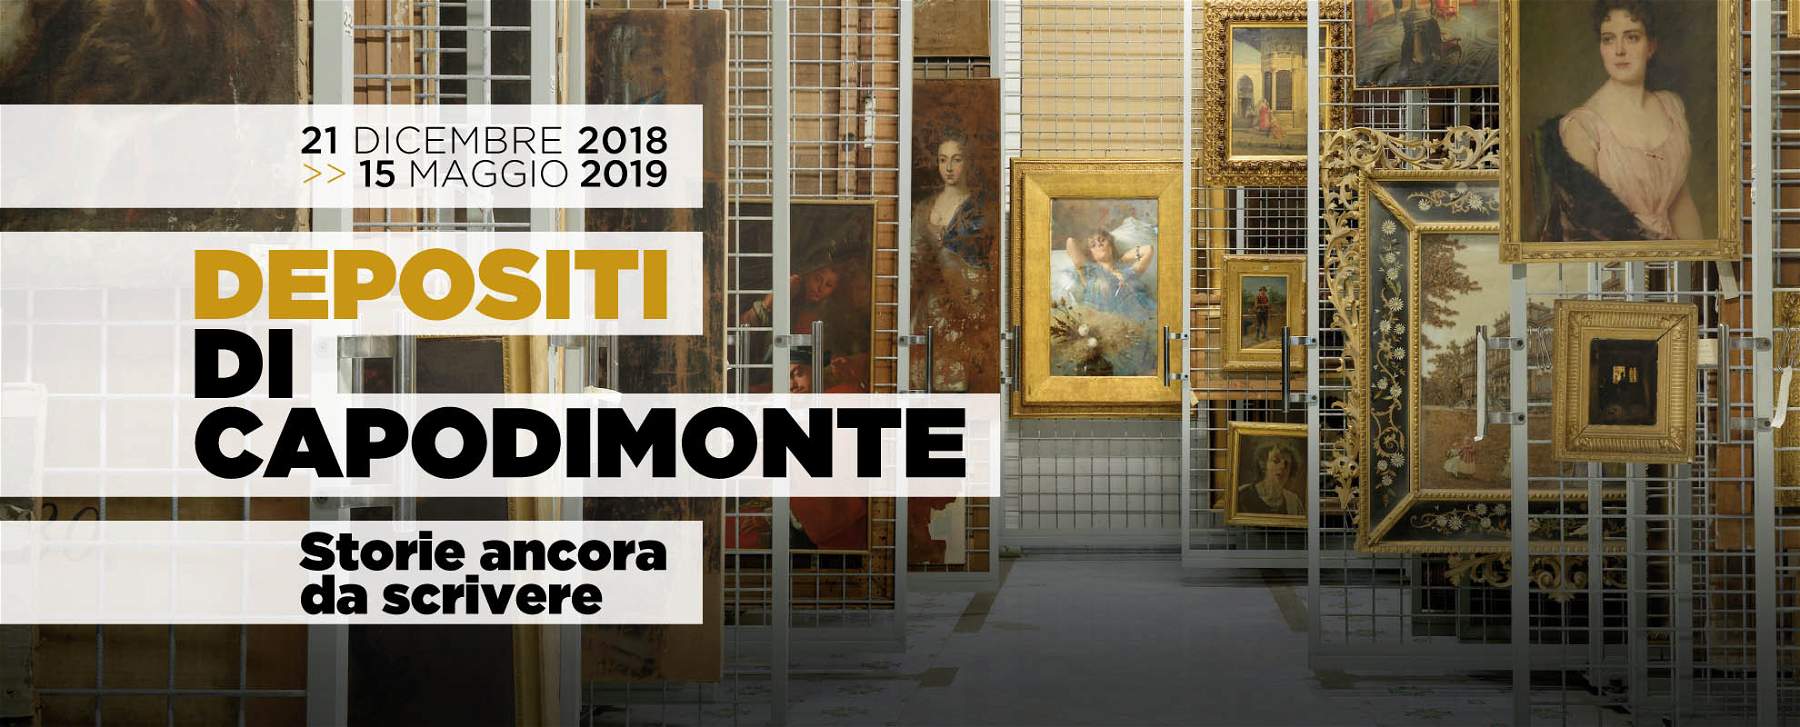 Naples, Capodimonte National Museum showcases its deposits, with 1,220 works